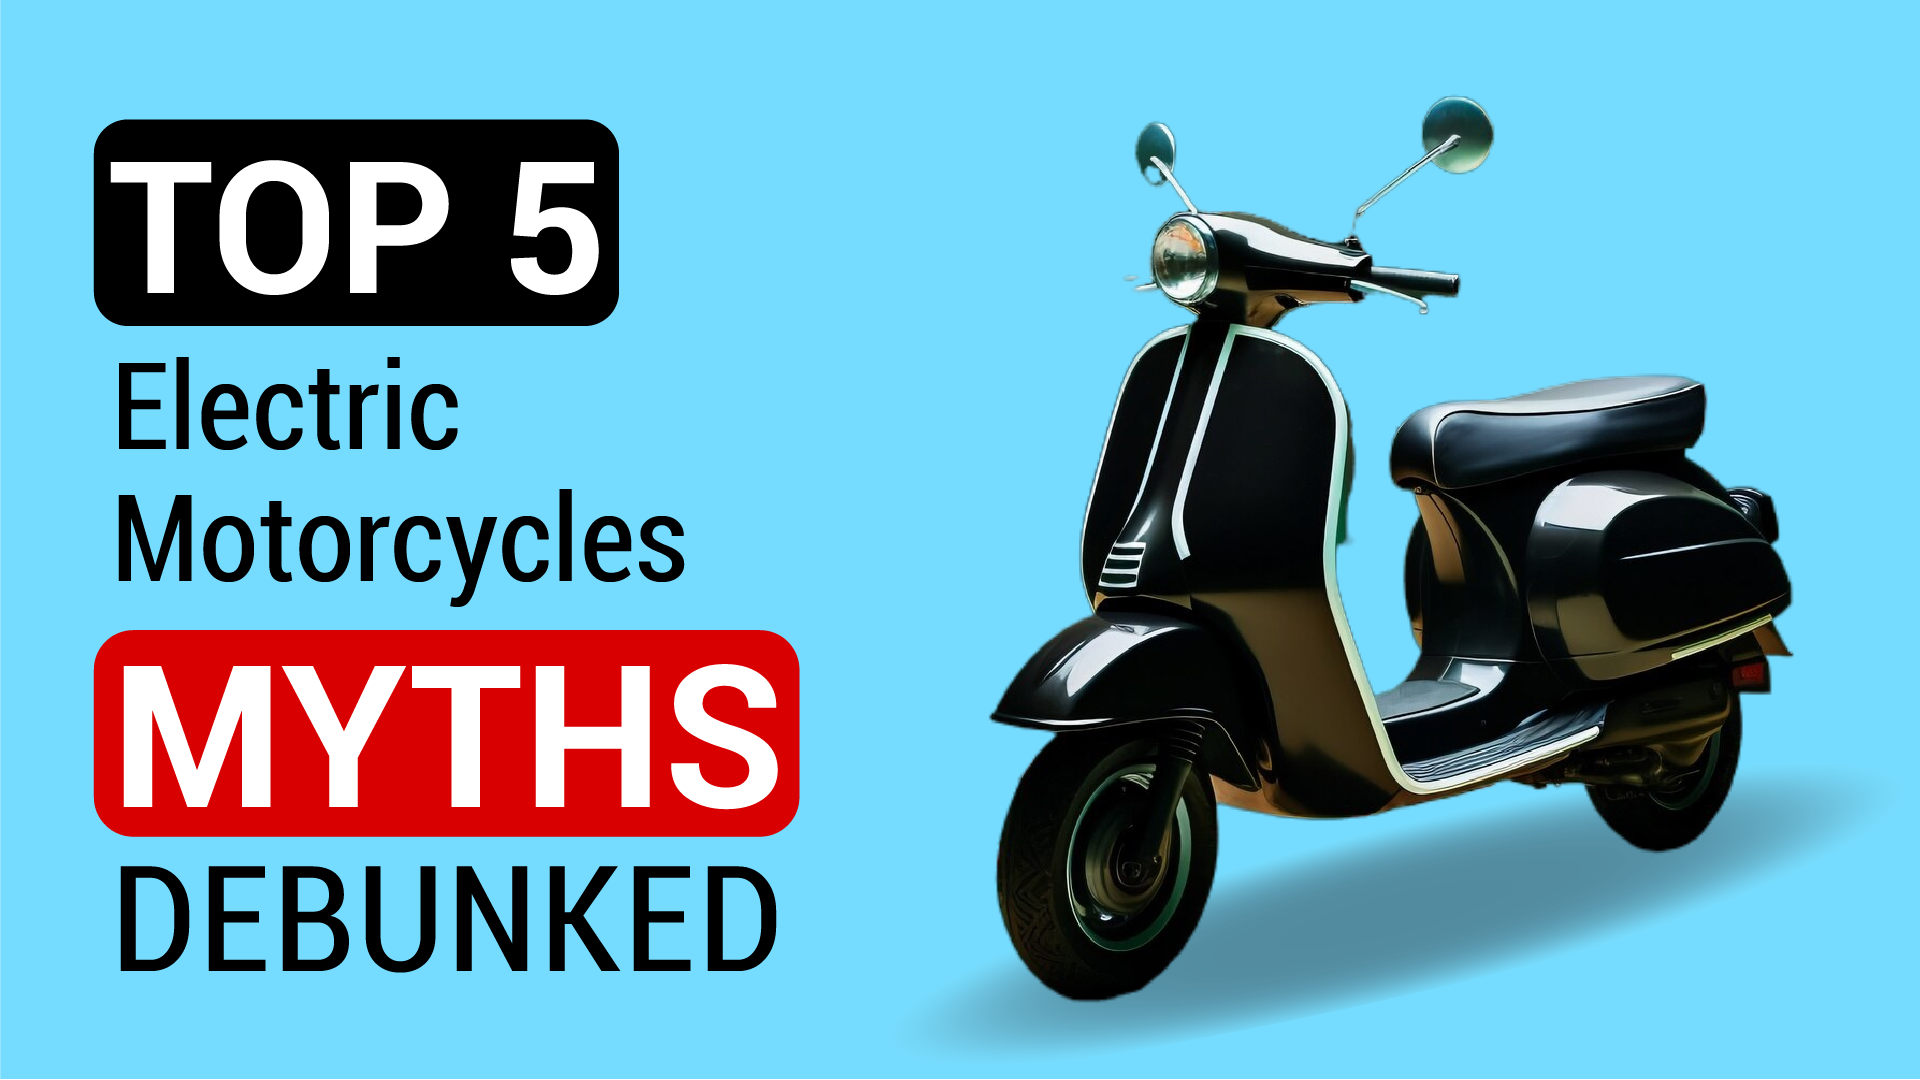 Top 5 Electric Motorcycles Myths Debunked